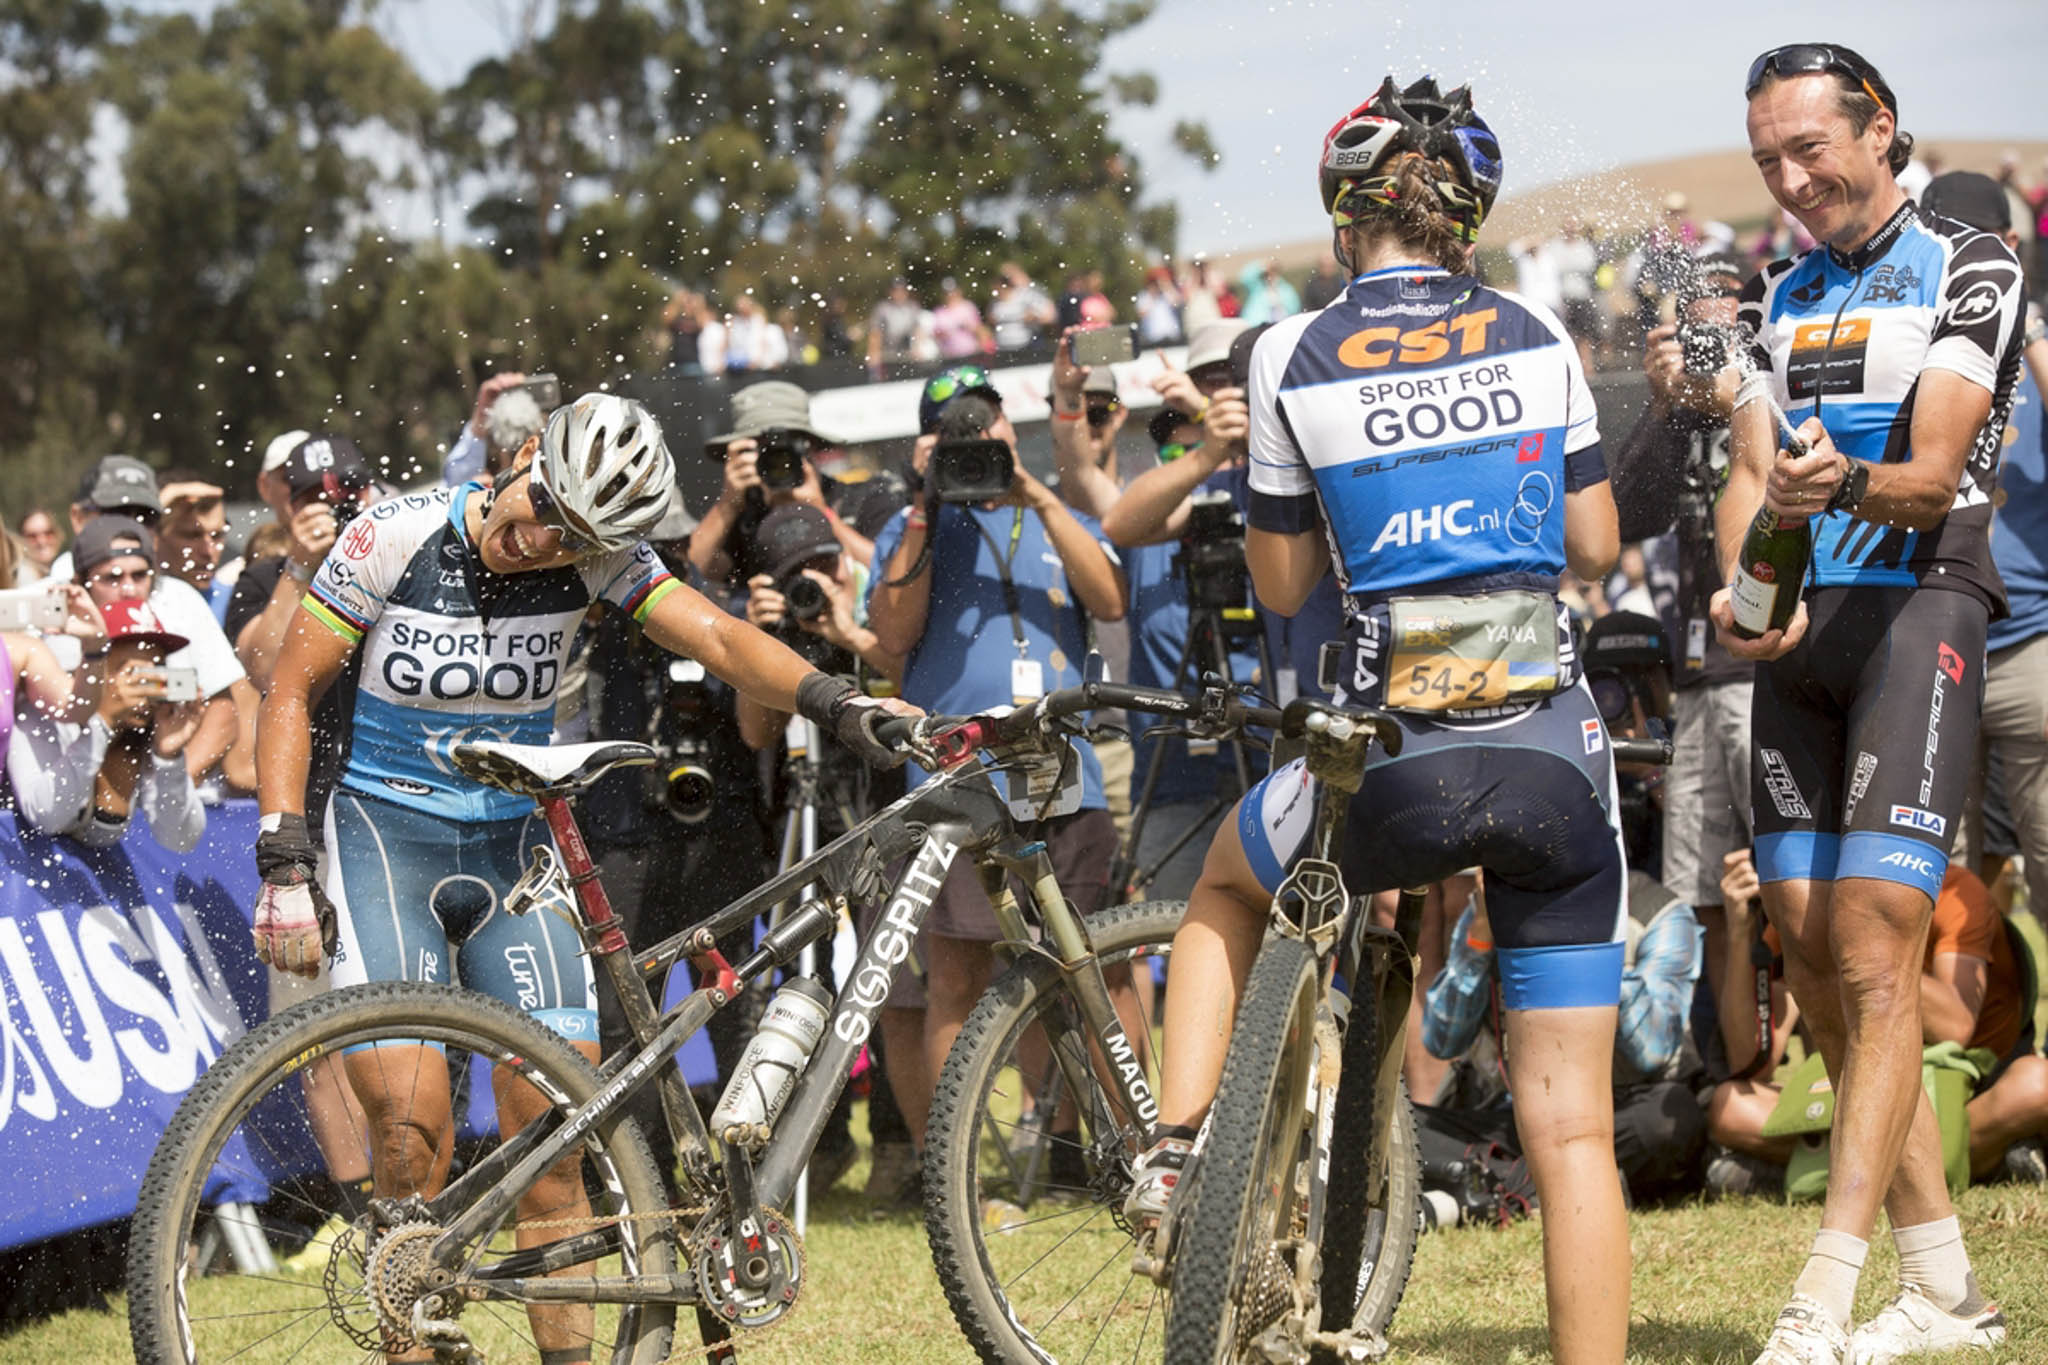 Sabine Spitz and Yana Belomoina win the final stage (stage 7) of the 2016 Absa Cape Epic Mountain Bike stage race from Boschendal in Stellenbosch to Meerendal Wine Estate in Durbanville, South Africa on the 20th March 2016 Photo by Sam Clark/Cape Epic/SPORTZPICS PLEASE ENSURE THE APPROPRIATE CREDIT IS GIVEN TO THE PHOTOGRAPHER AND SPORTZPICS ALONG WITH THE ABSA CAPE EPIC ace2016